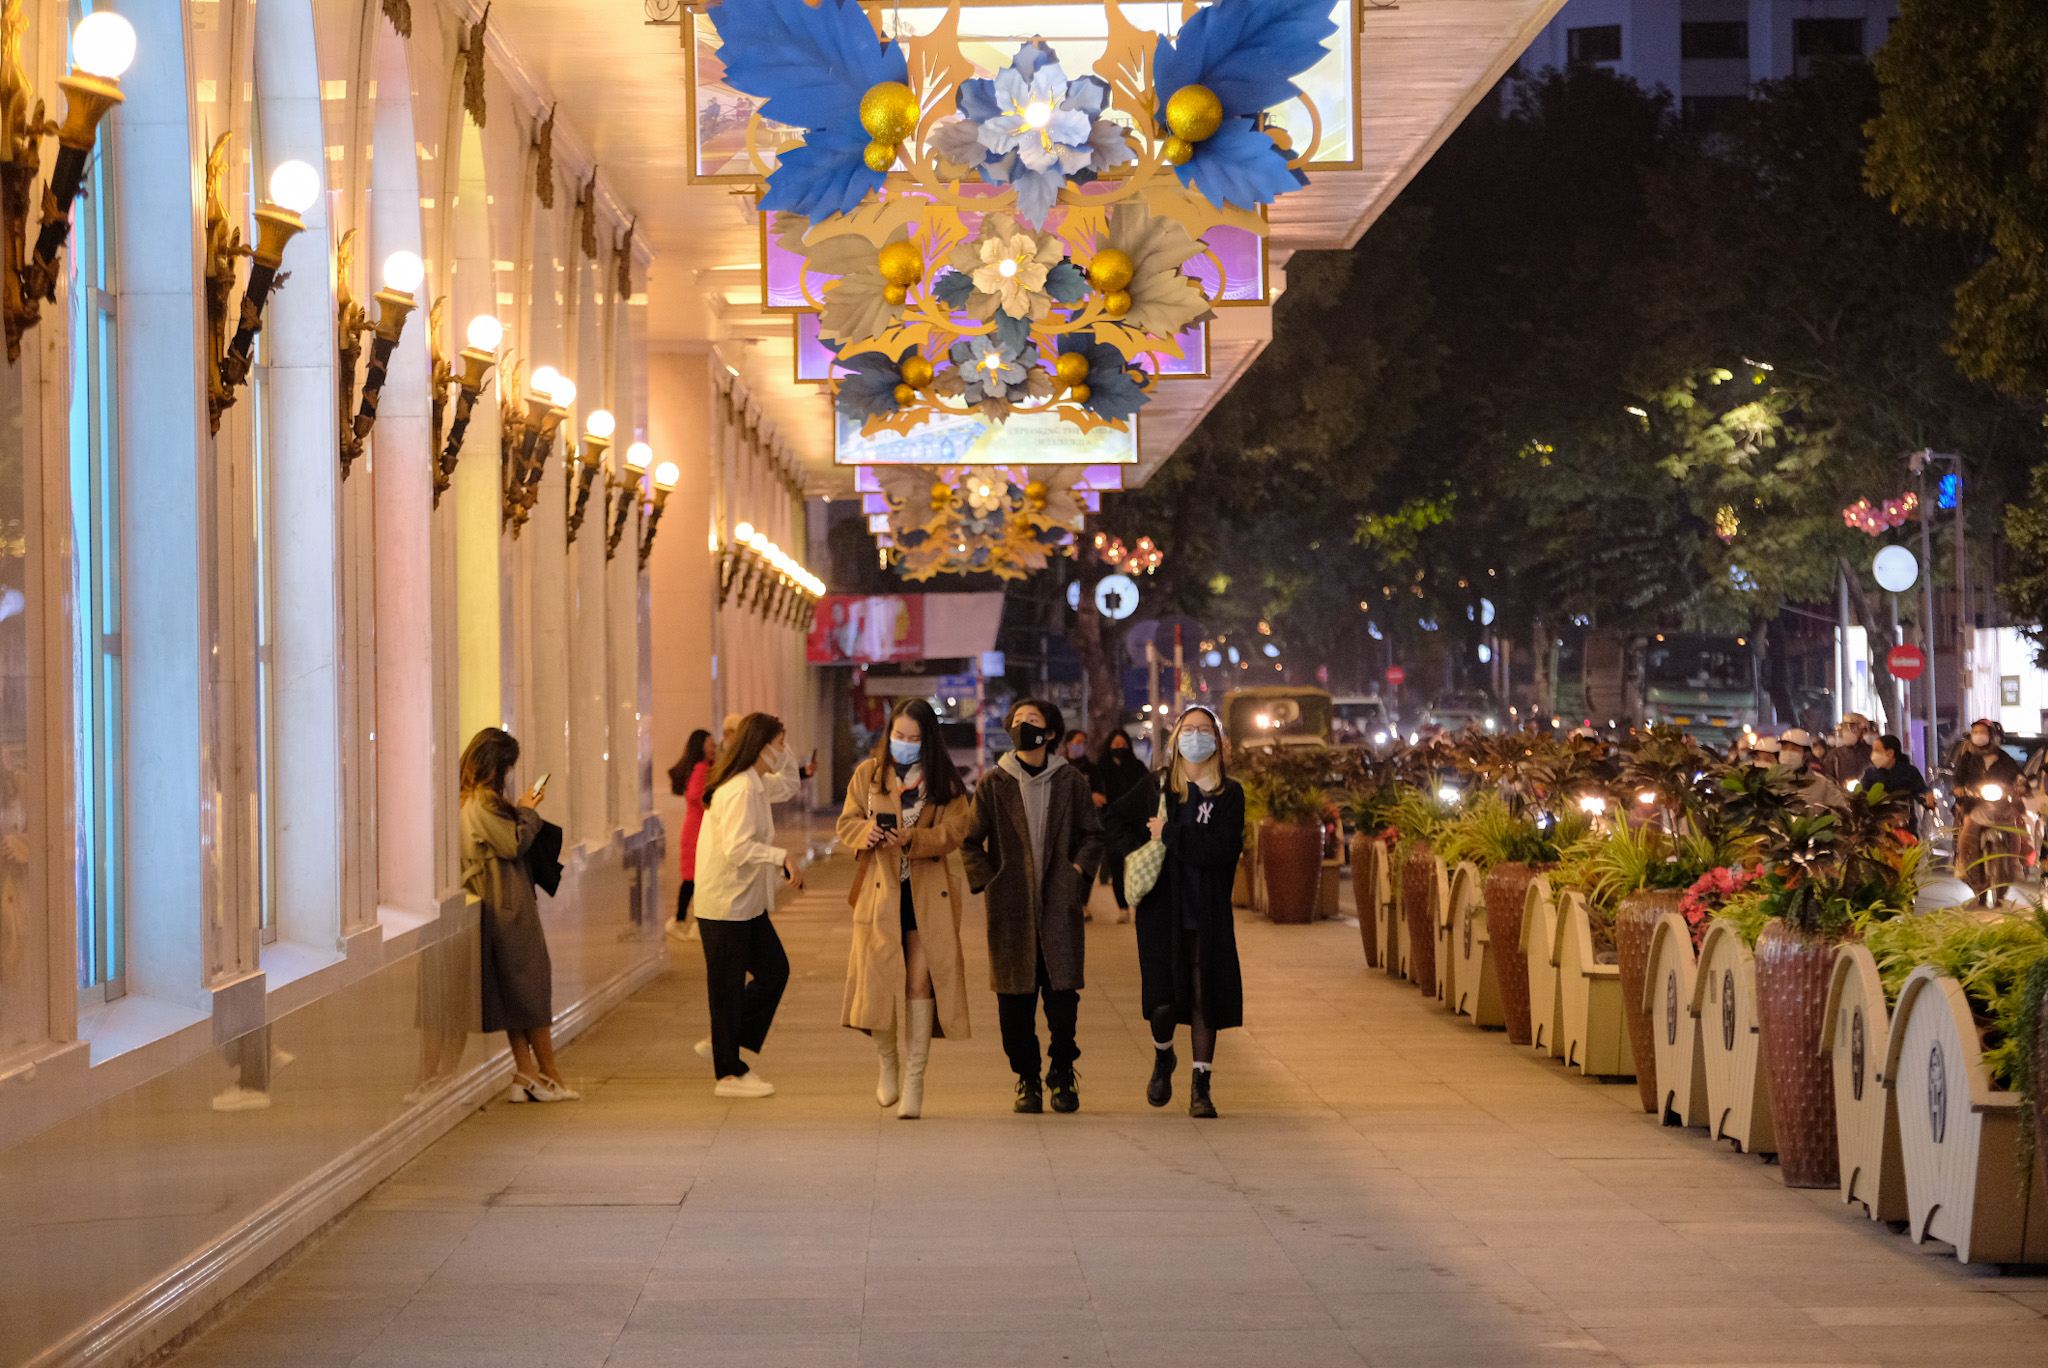 People go for a walk around Trang Tien Plaza in Hanoi on the night of December 31, 2021. Photo: Tuoi Tre